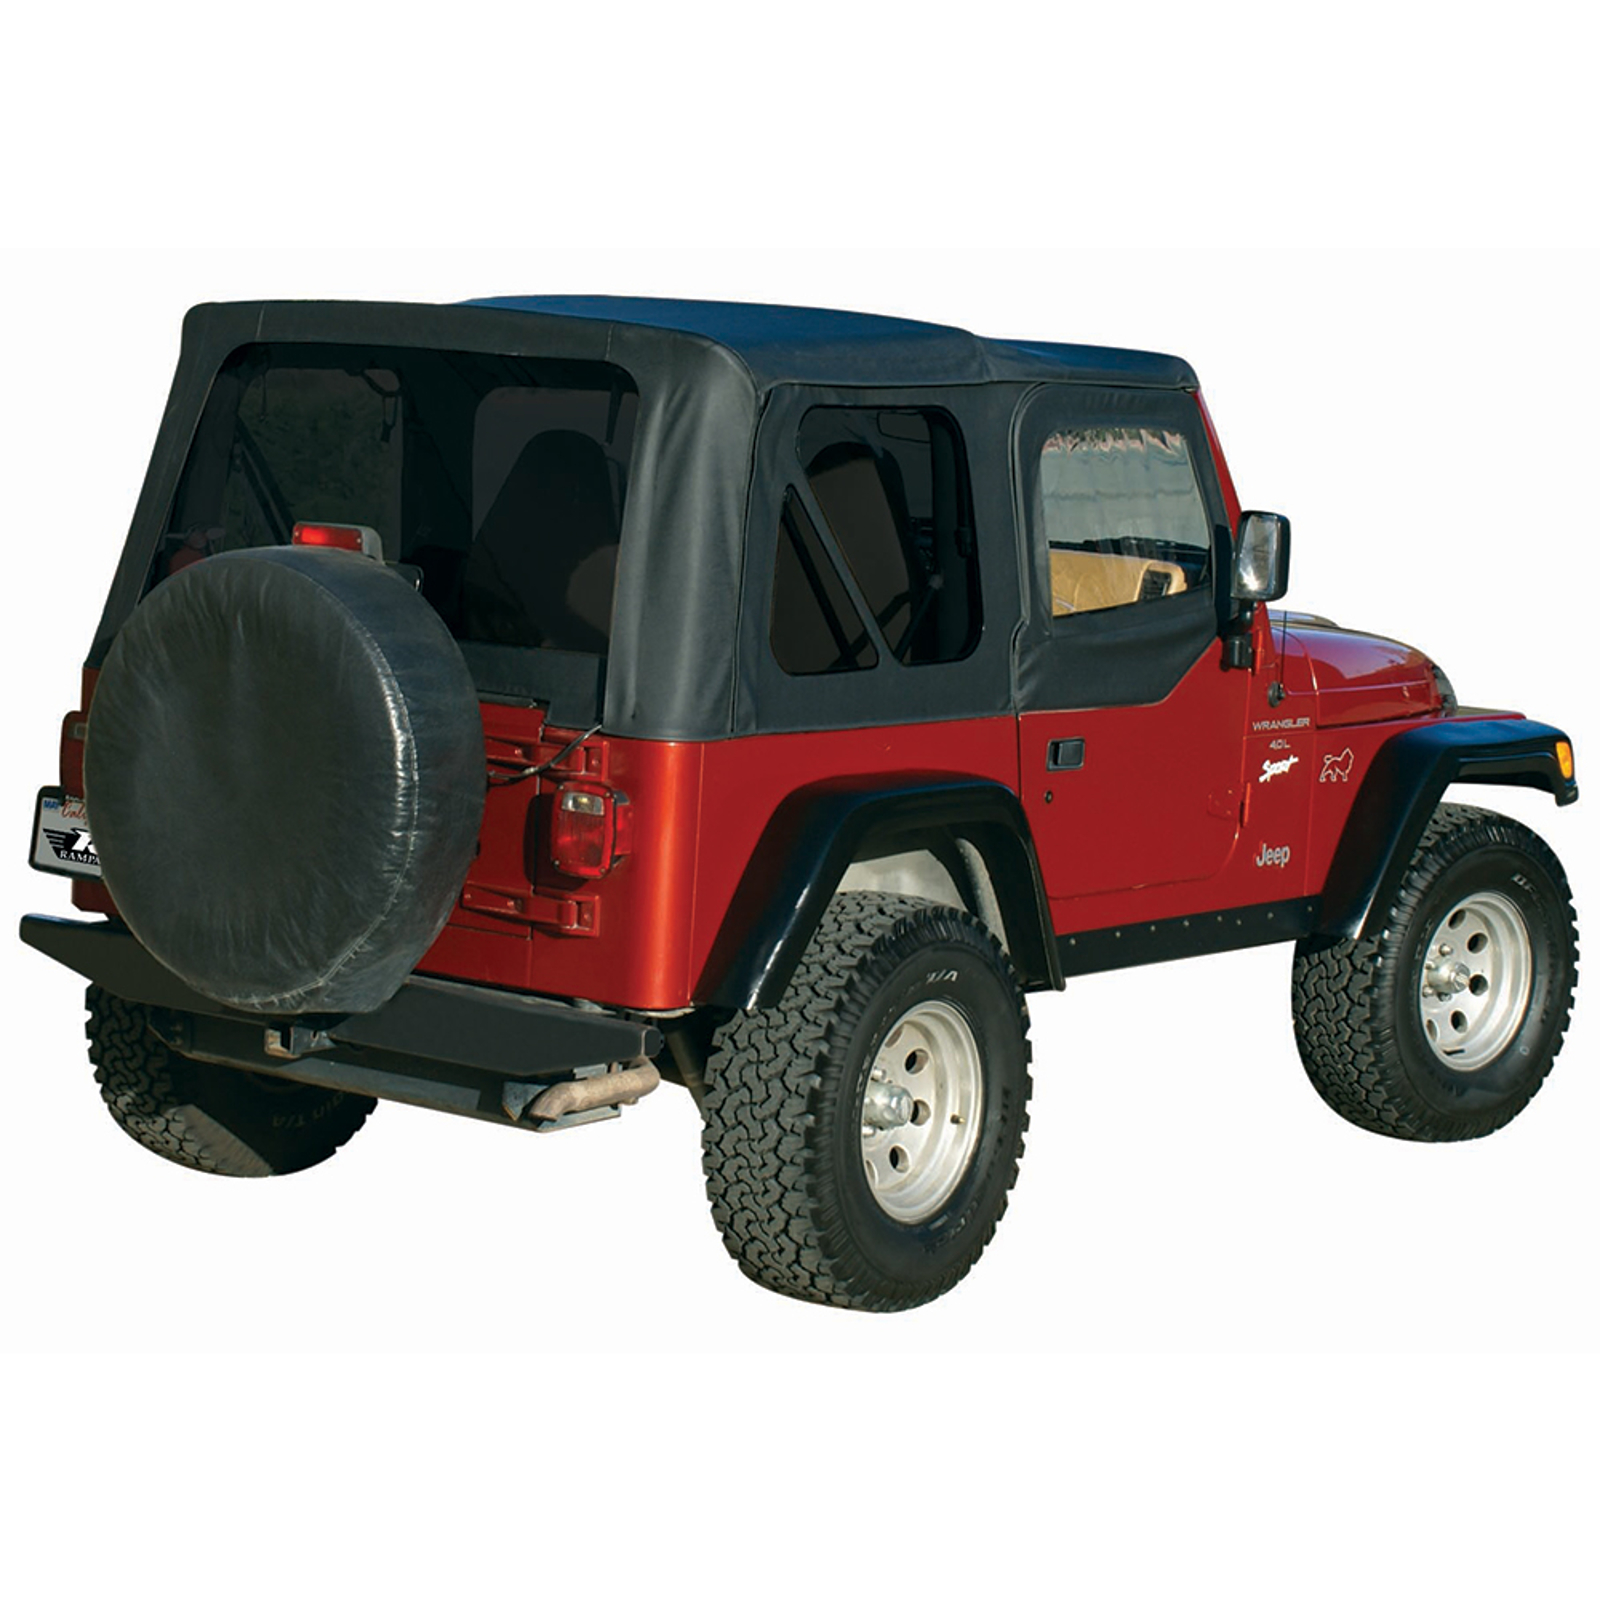 Factory Replacement Top for Jeep Wrangler '88-'06